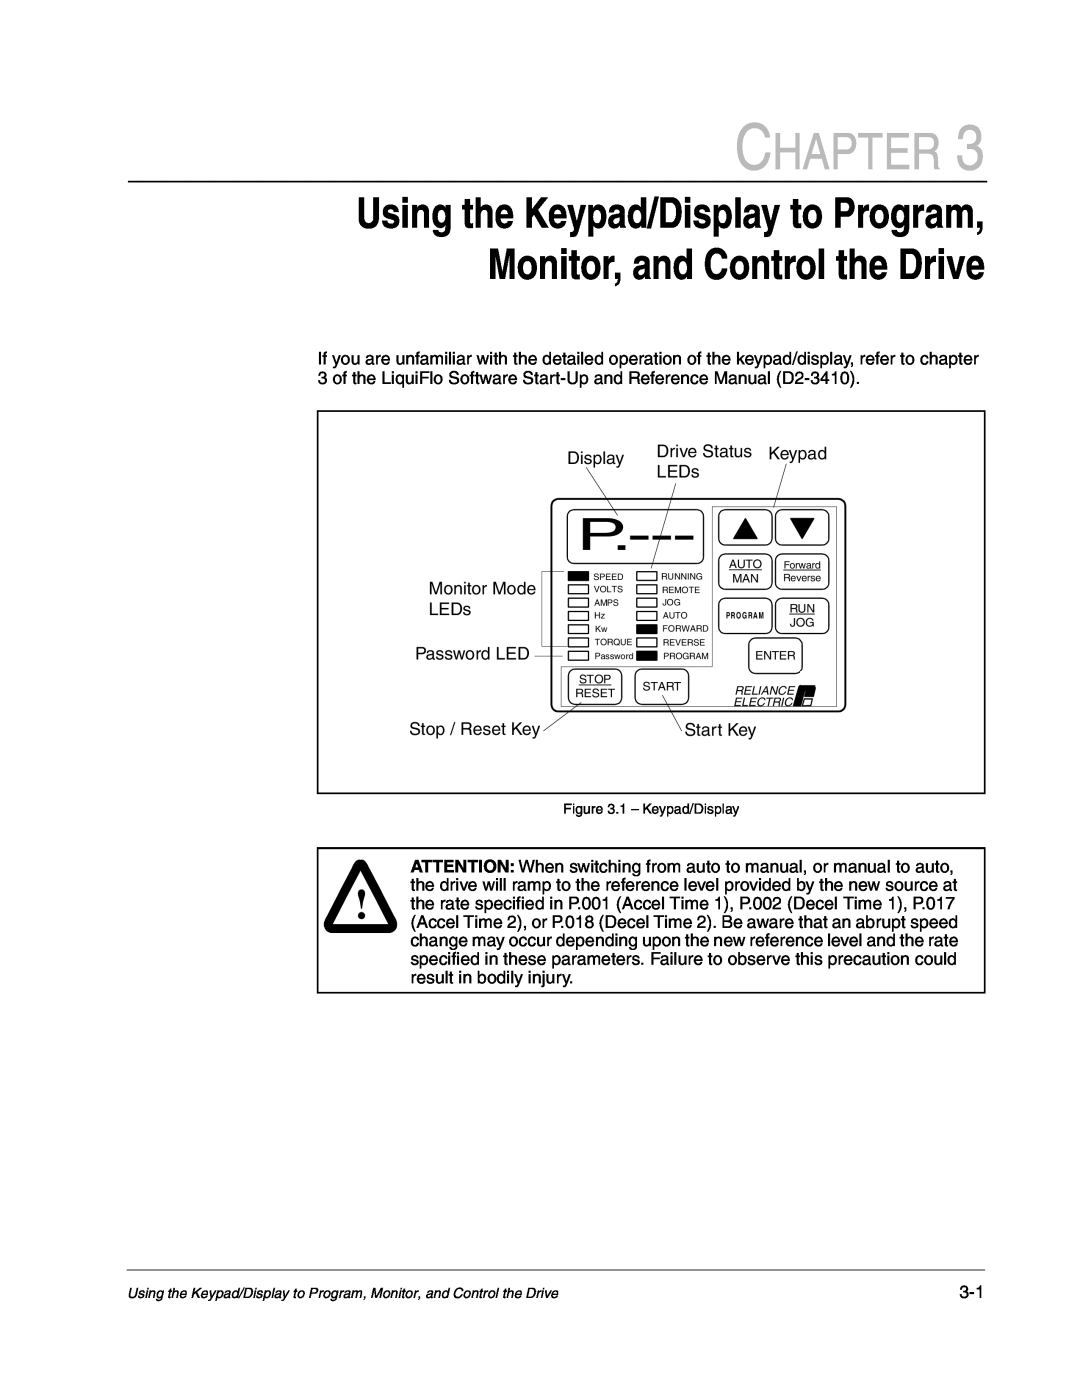 Carrier D2-3466-2 instruction manual Using the Keypad/Display to Program, Monitor, and Control the Drive, Chapter 